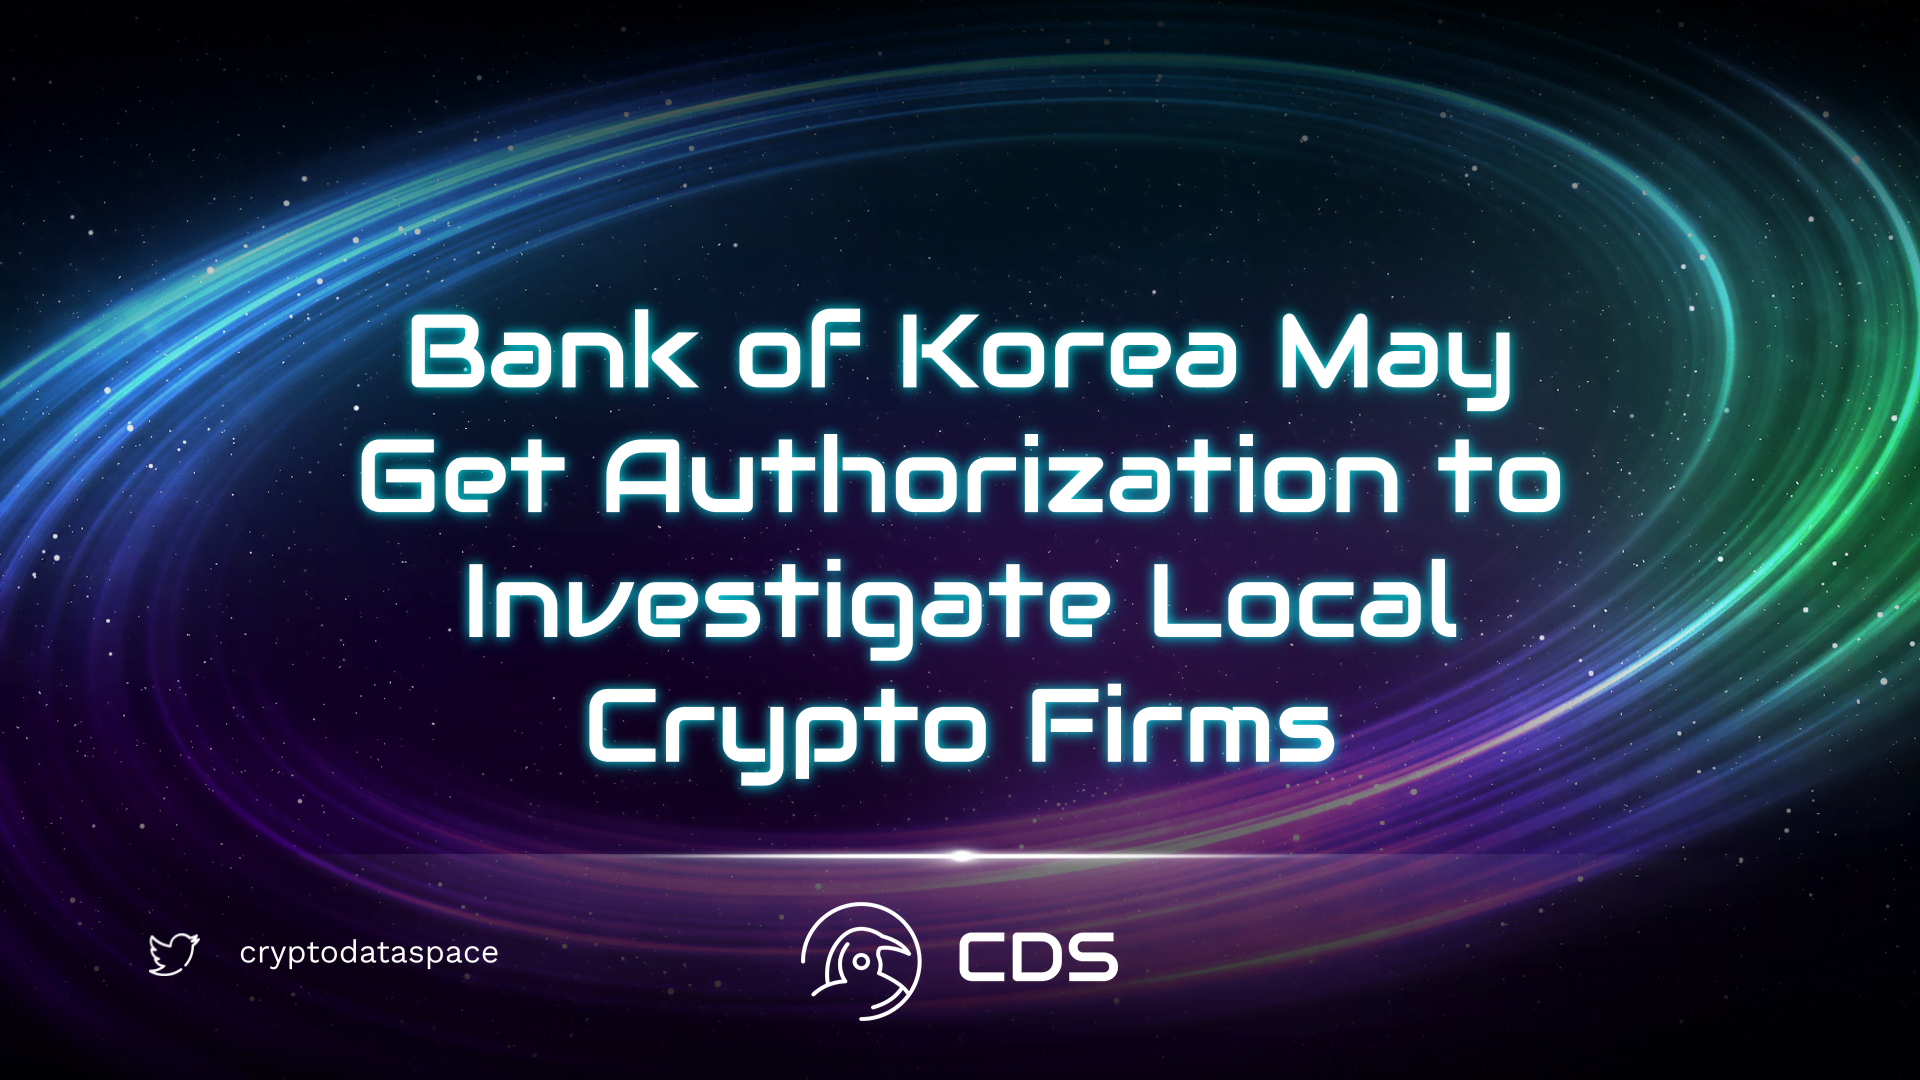 Bank of Korea May Get Authorization to Investigate Local Crypto Firms